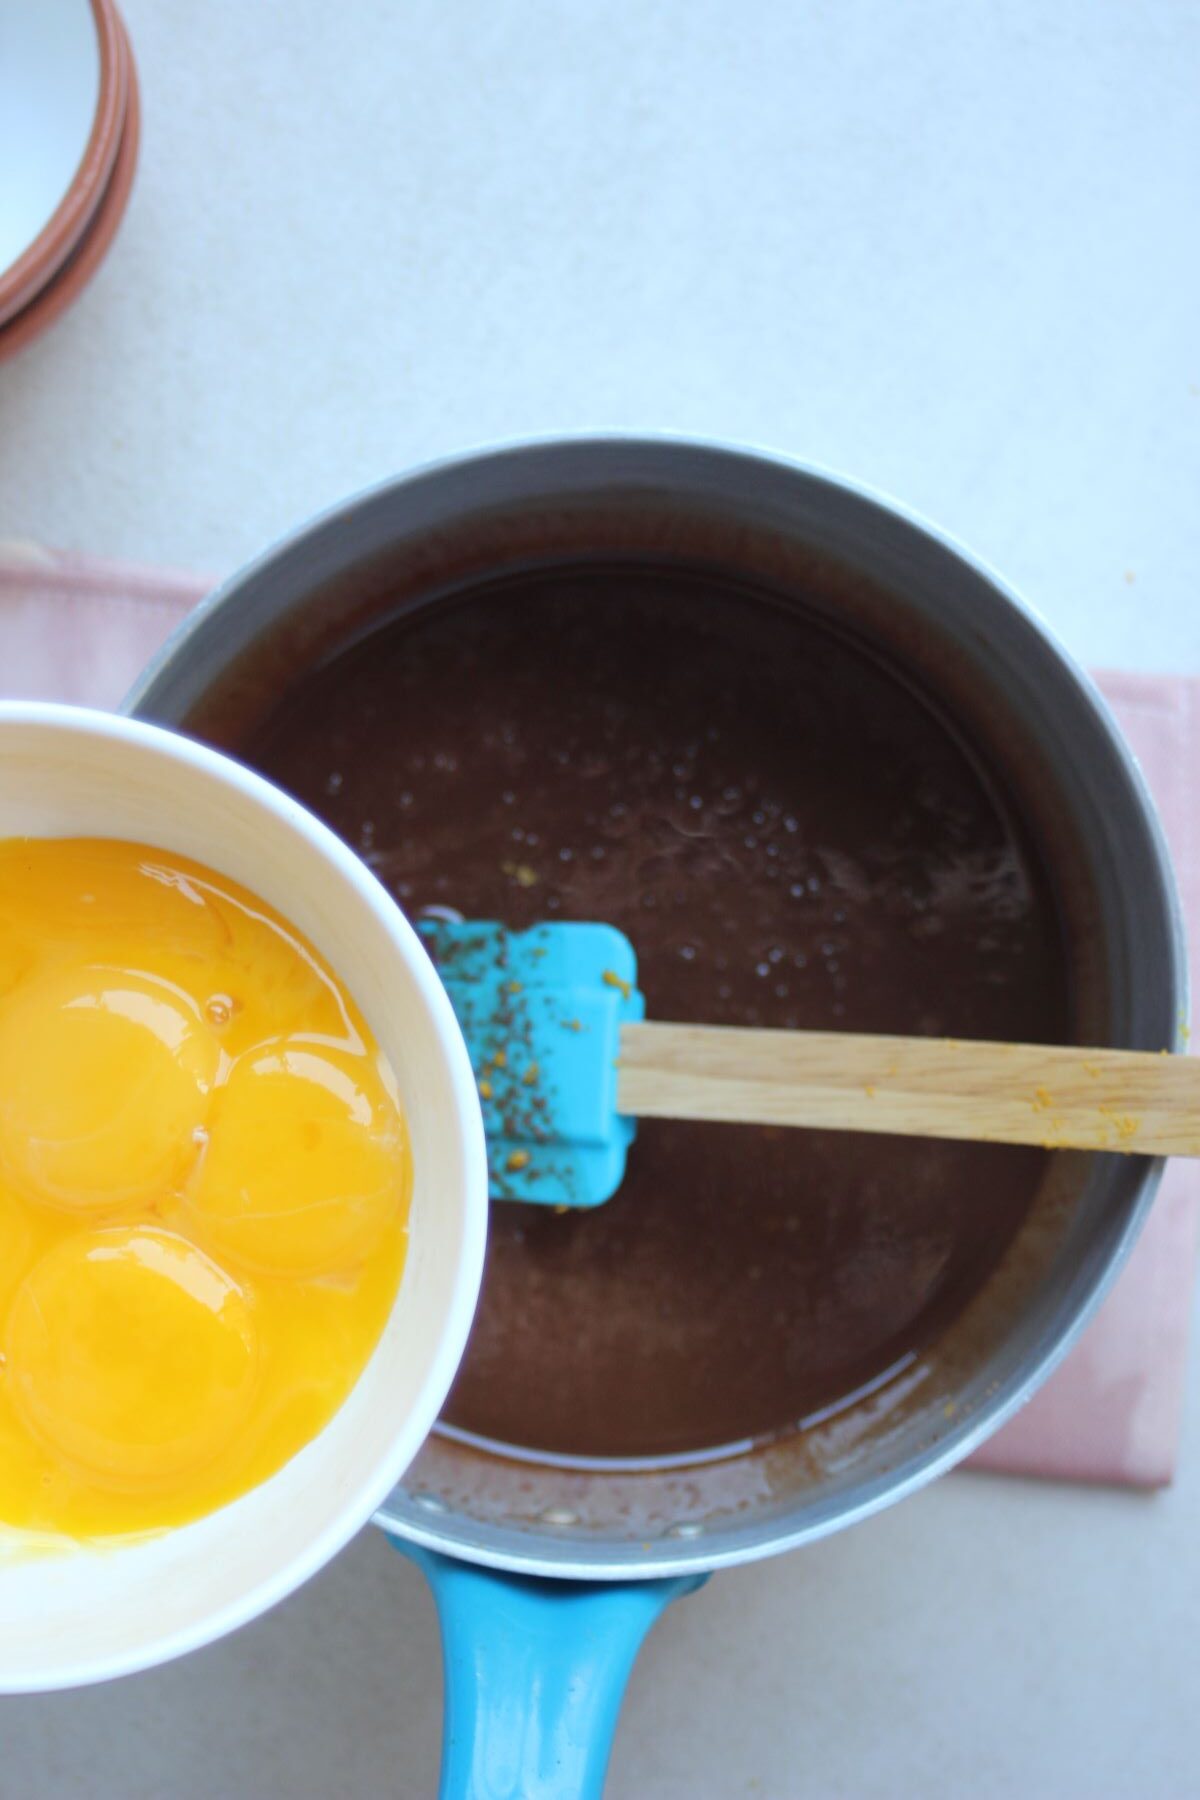 Bowl with egg yolks is about to be poured into a deep saucepan with melted chocolate.